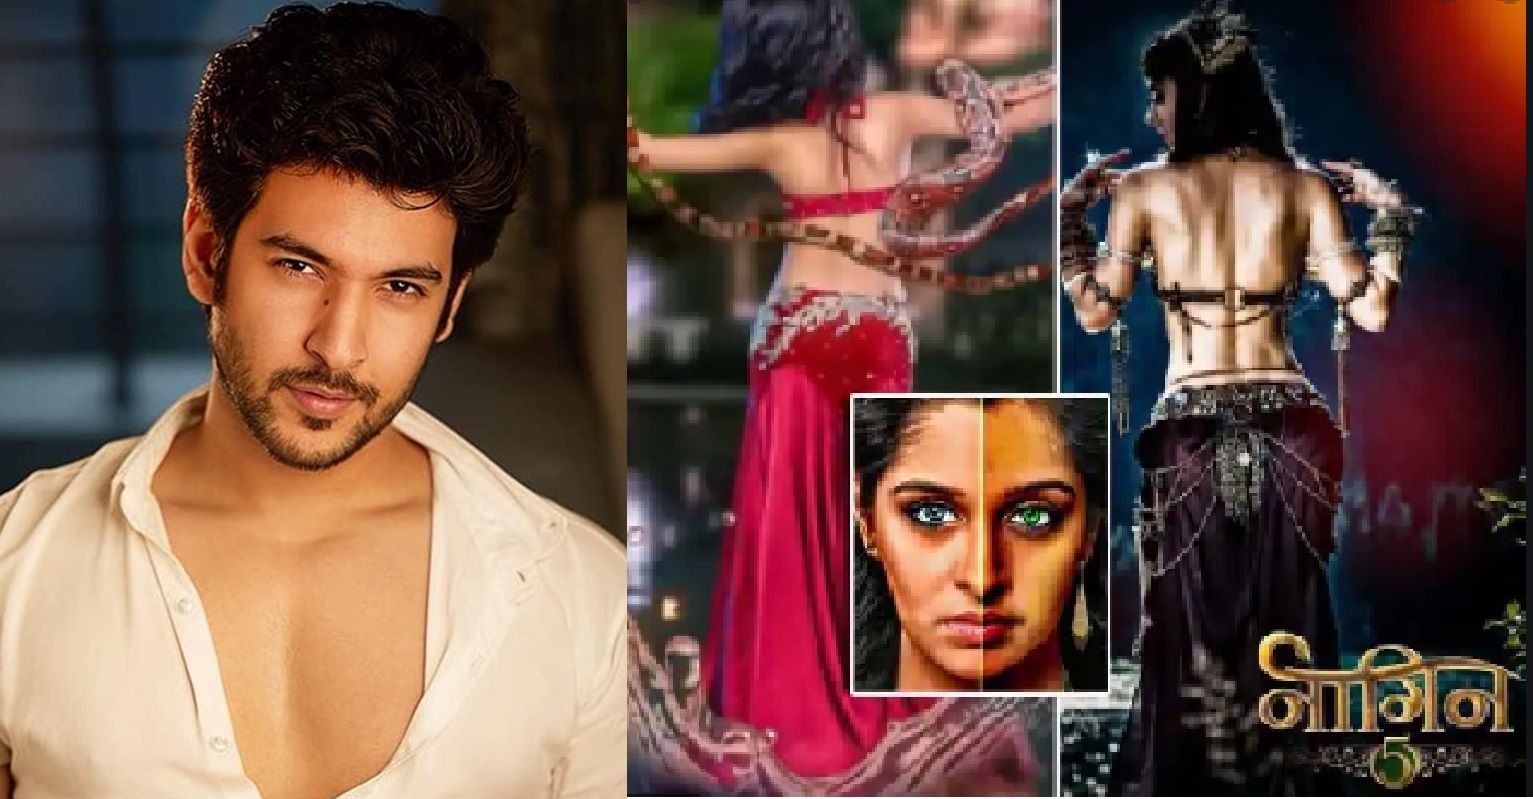 Shivin Narang Drops A Big Hint On Being Asked About Being Cast In Naagin 5: Have Done A Guest Appearance On Naagin Once